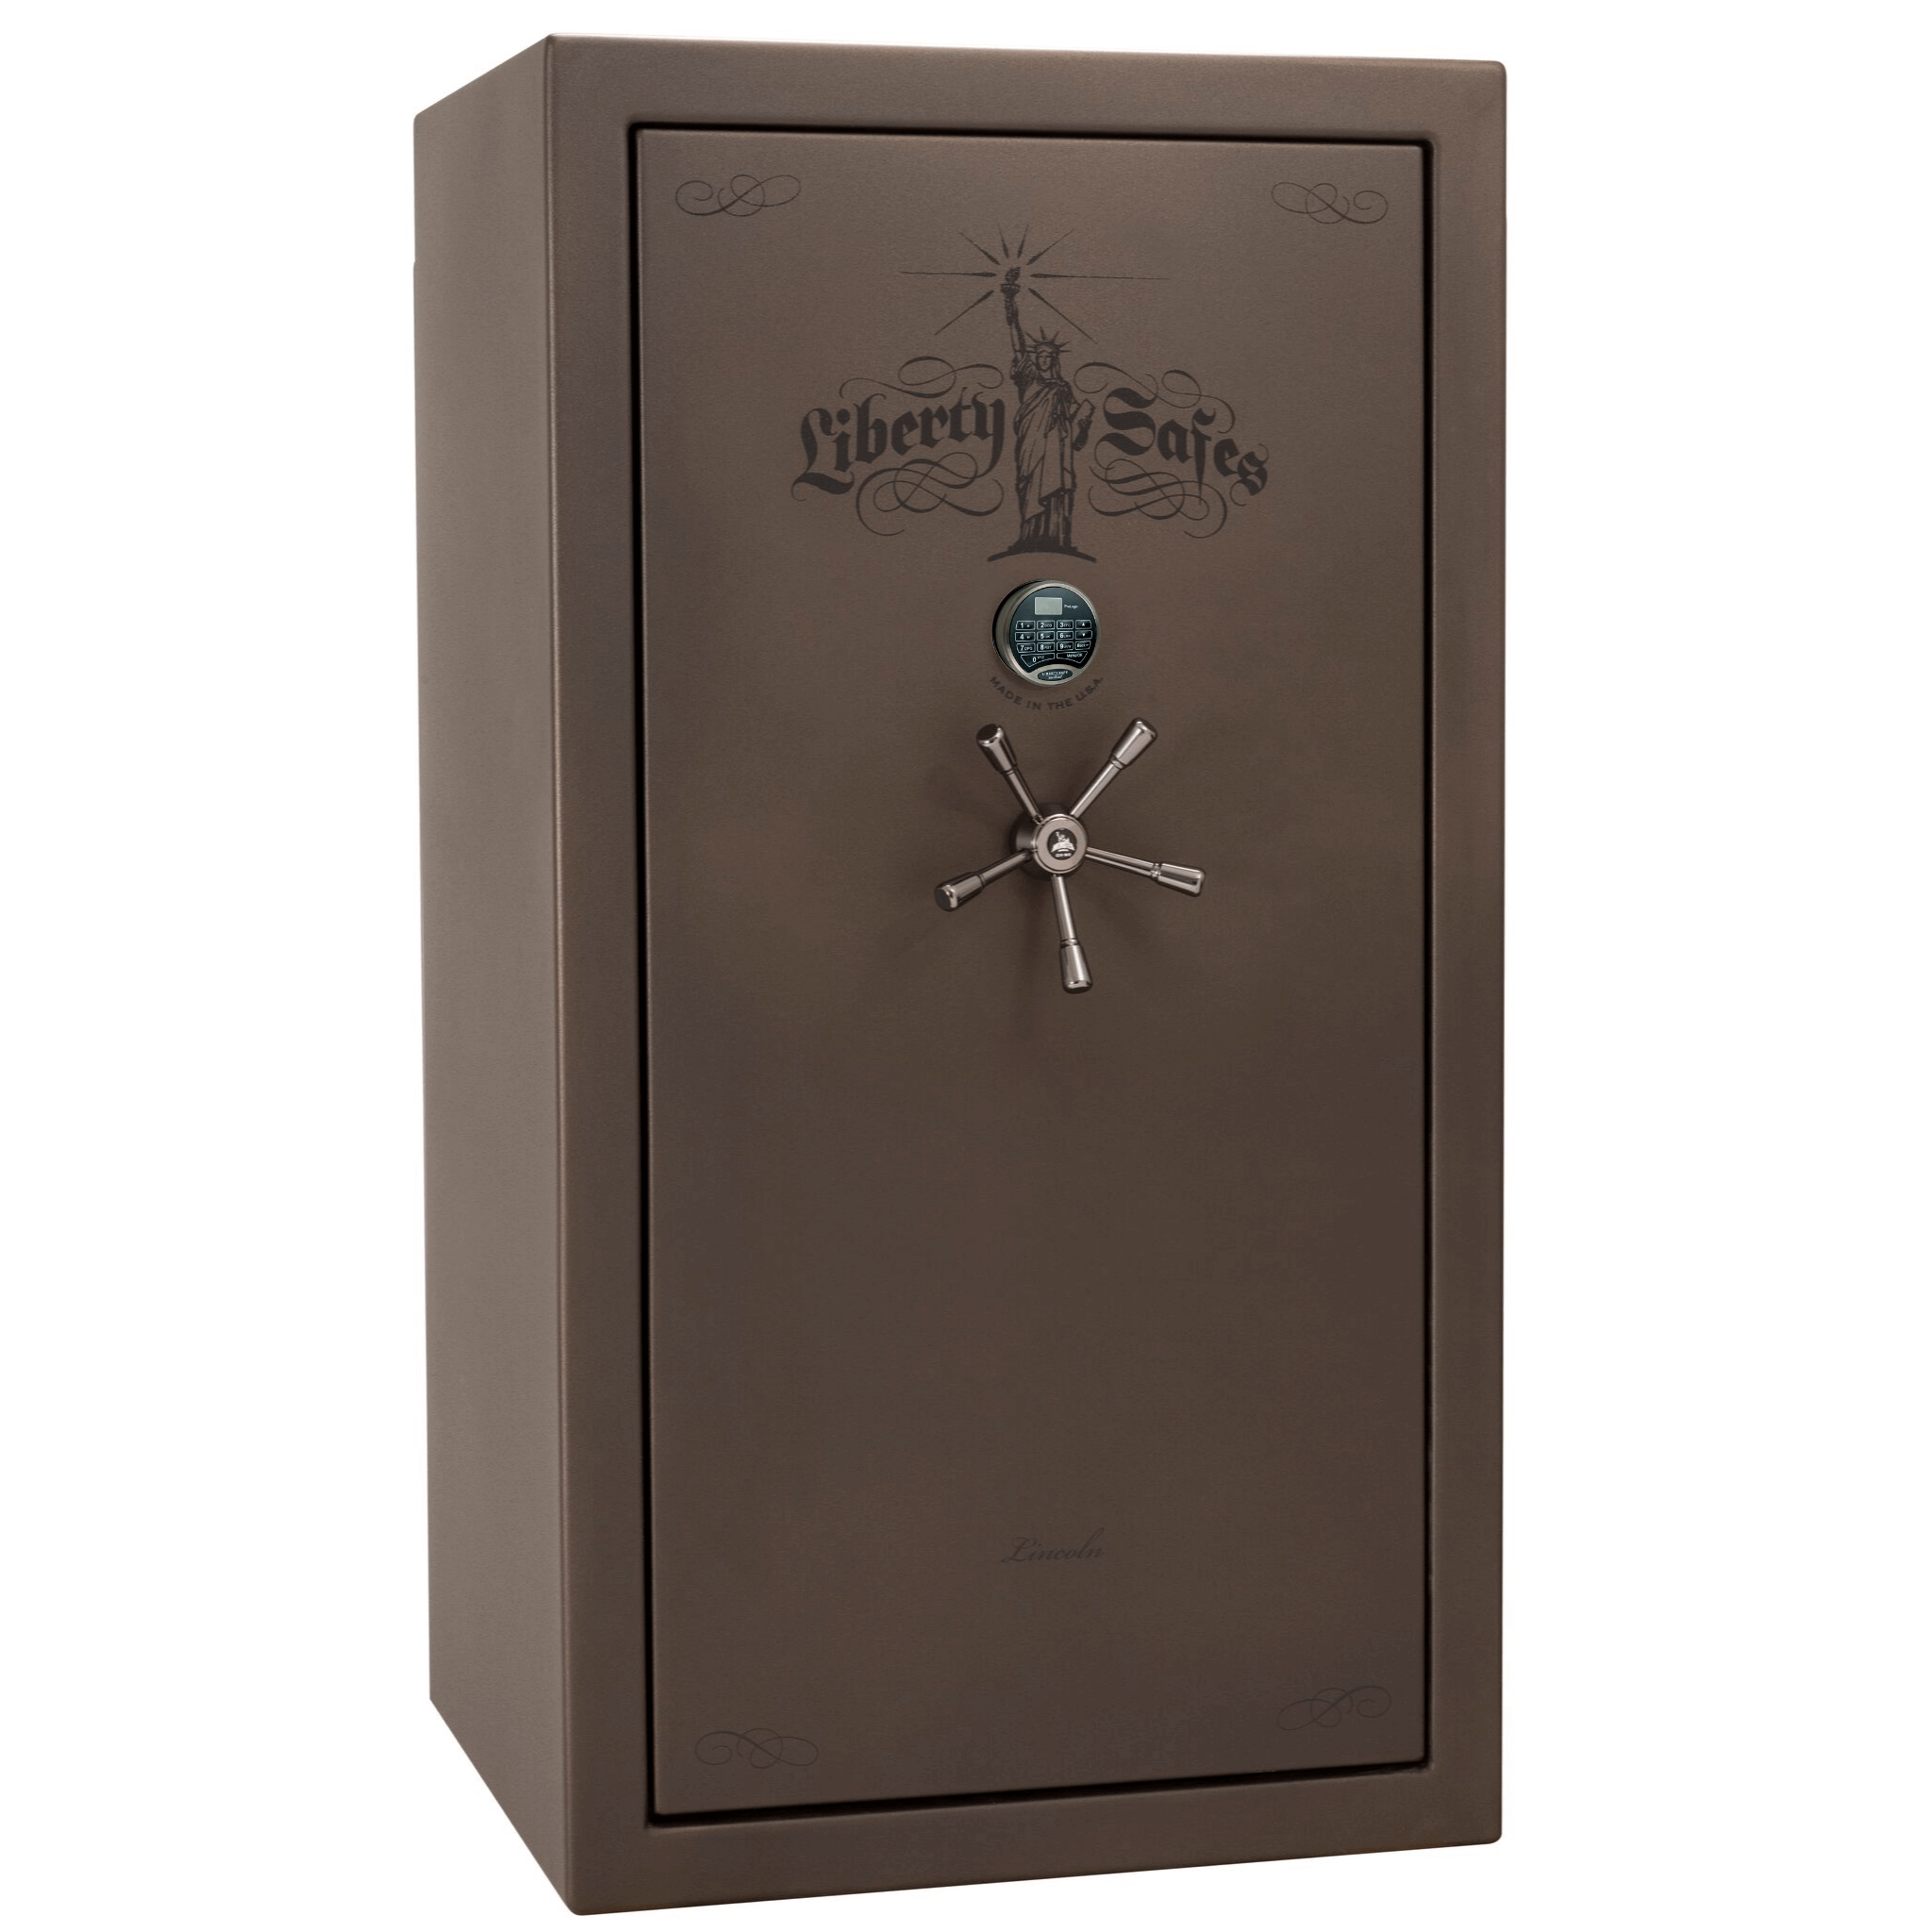 Lincoln Series | Level 5 Security | 110 Minute Fire Protection | 50 | Dimensions: 72.5"(H) x 42"(W) x 32"(D) | Gray Marble | Mechanical Lock, photo 41